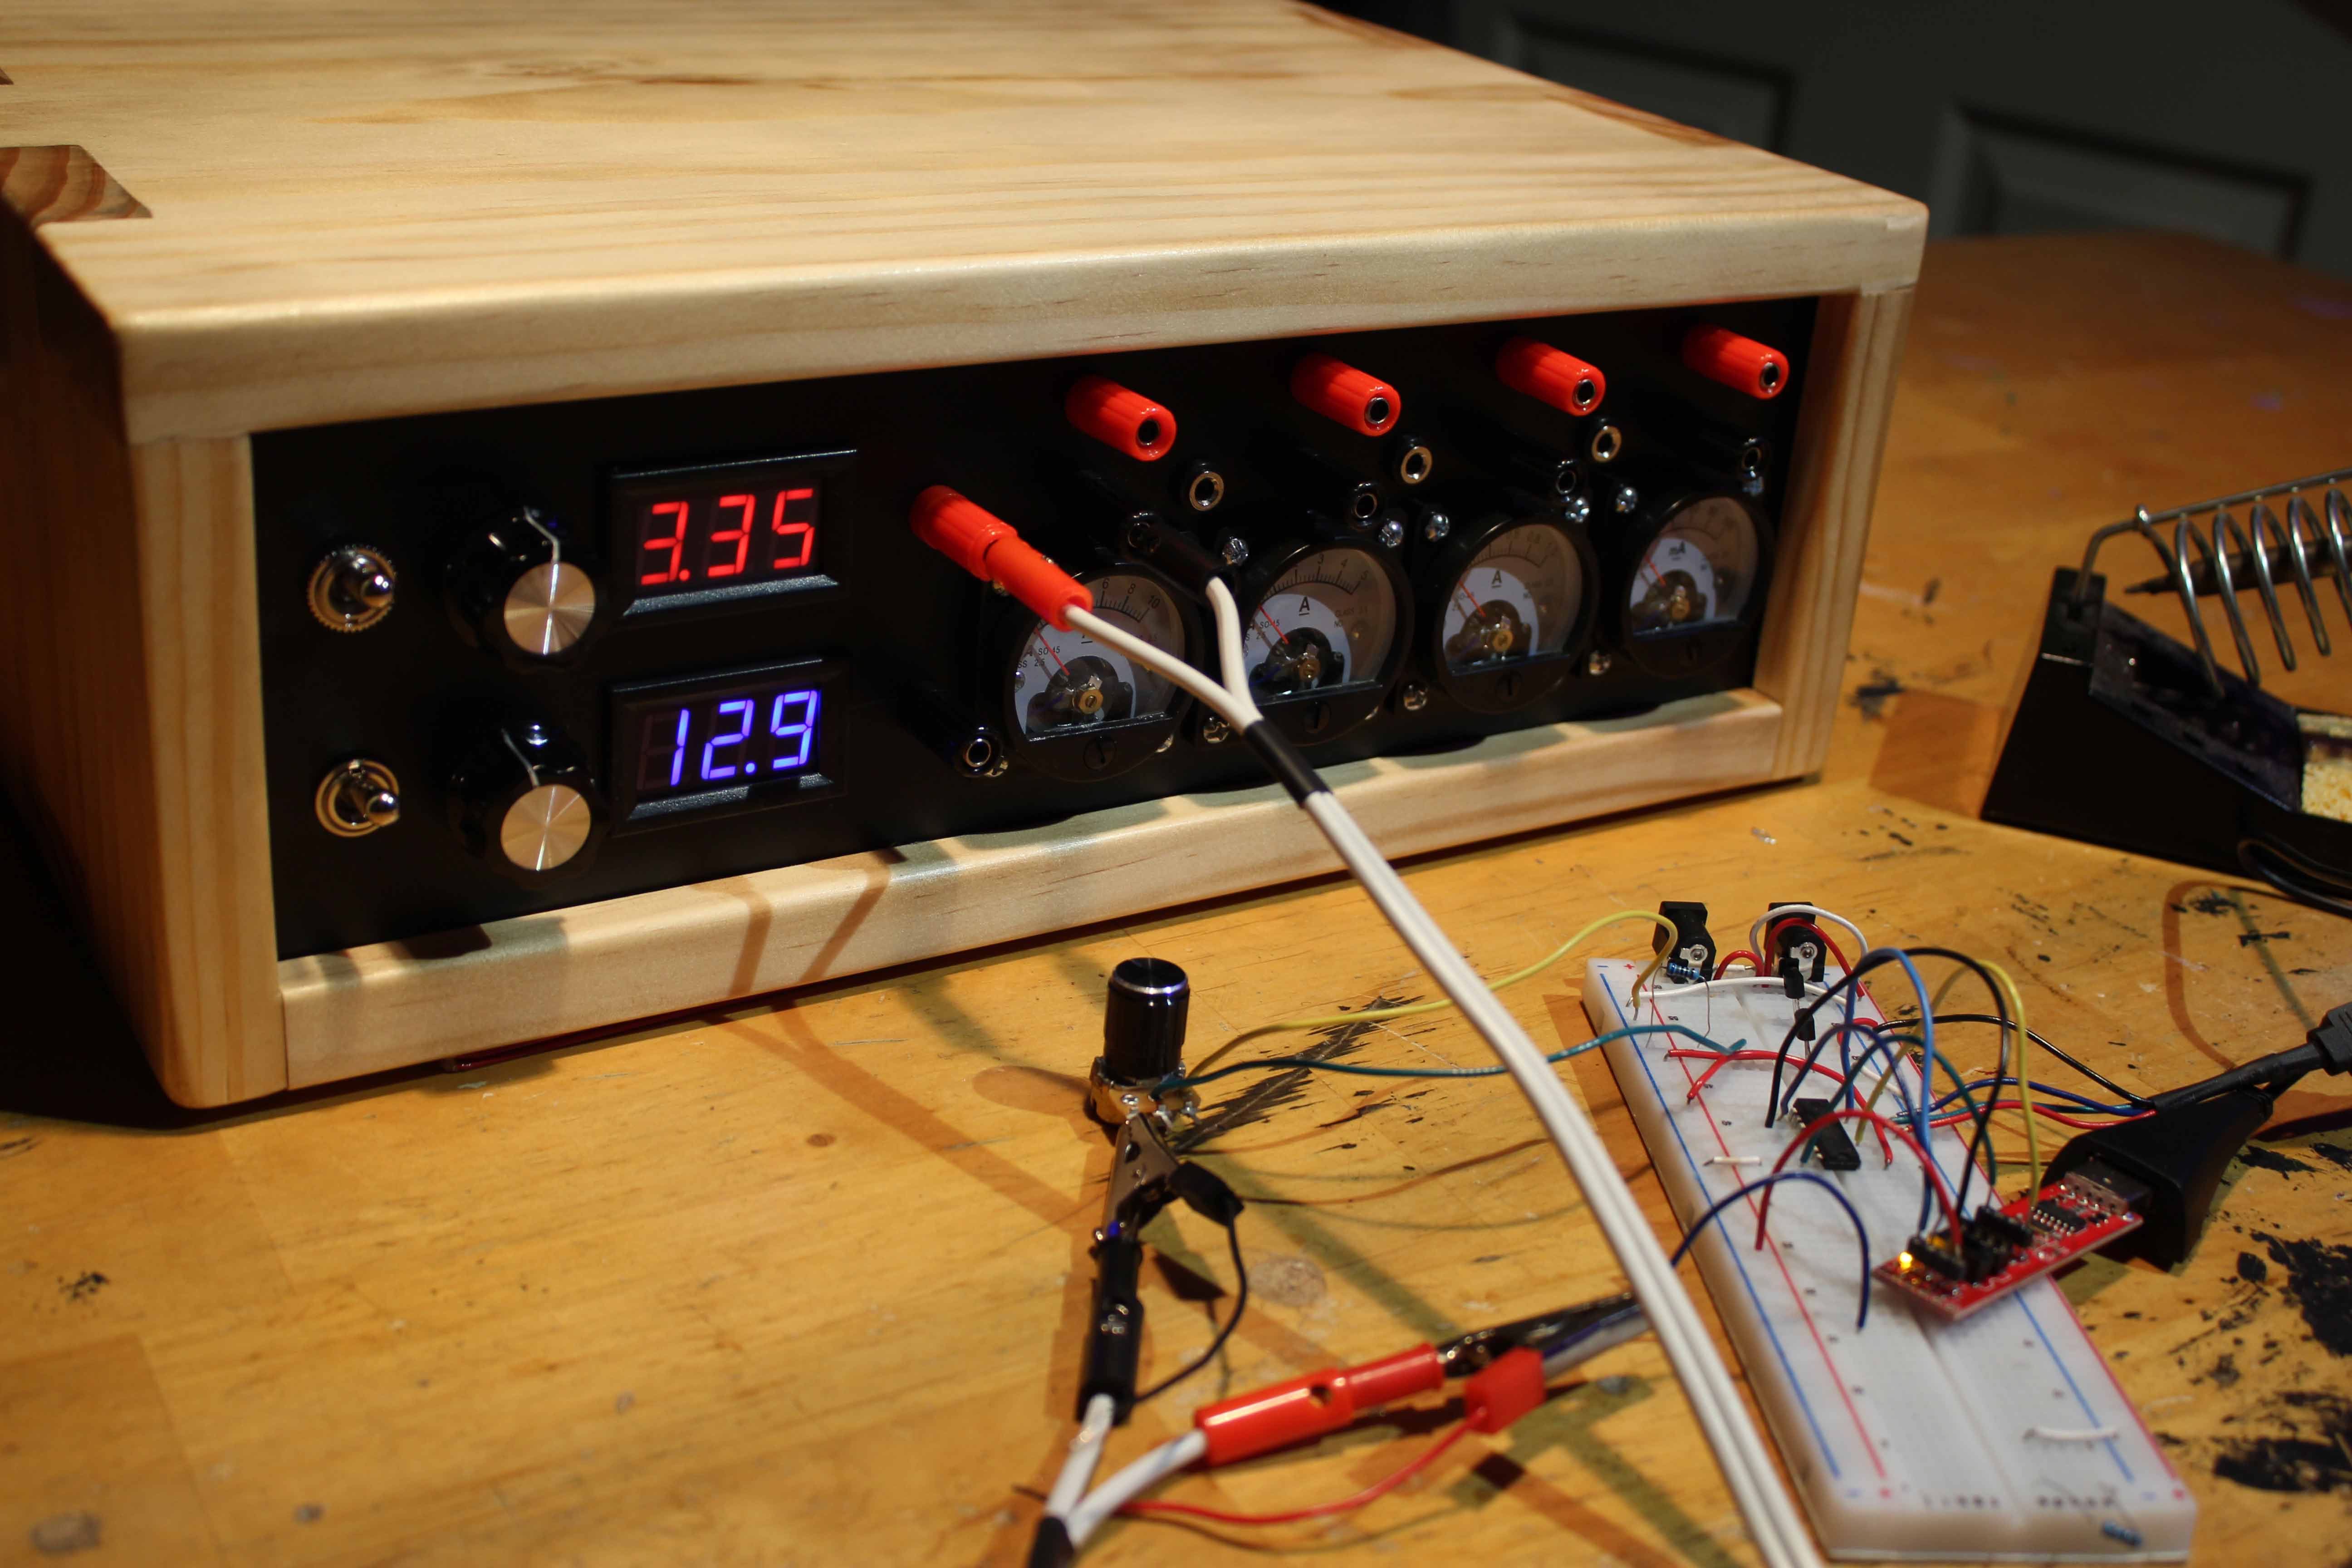 A working DC lab-bench power supply